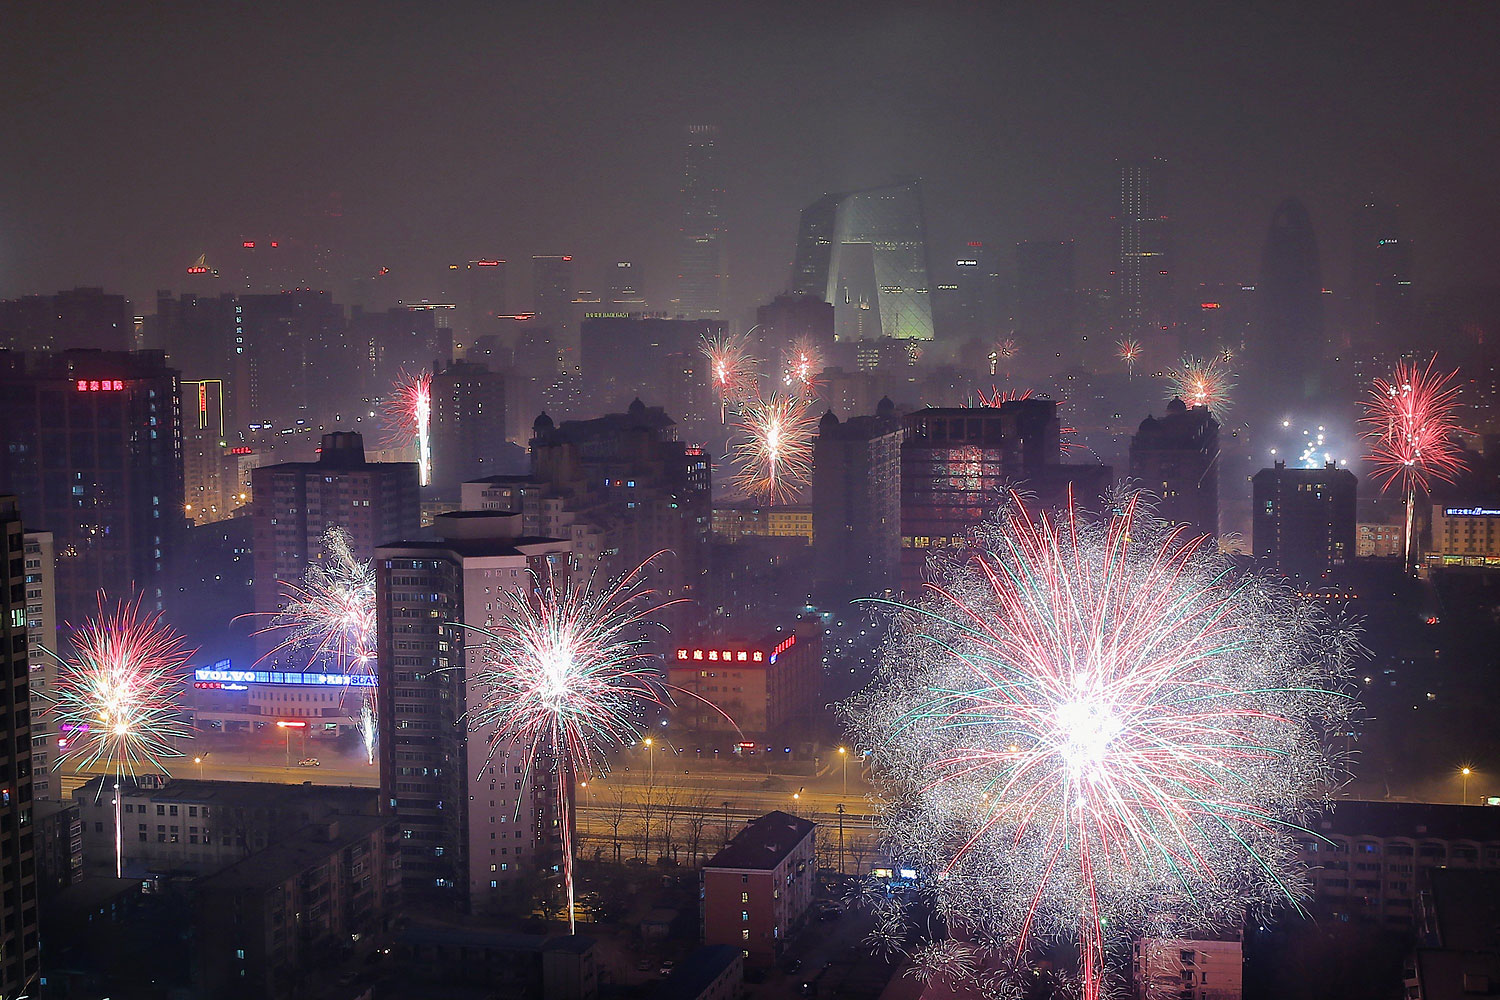 Fireworks illuminate the skyline to celebrate Chinese Lunar New Year of Horse and cause severe air pollution on Jan. 30, 2014 in Beijing.